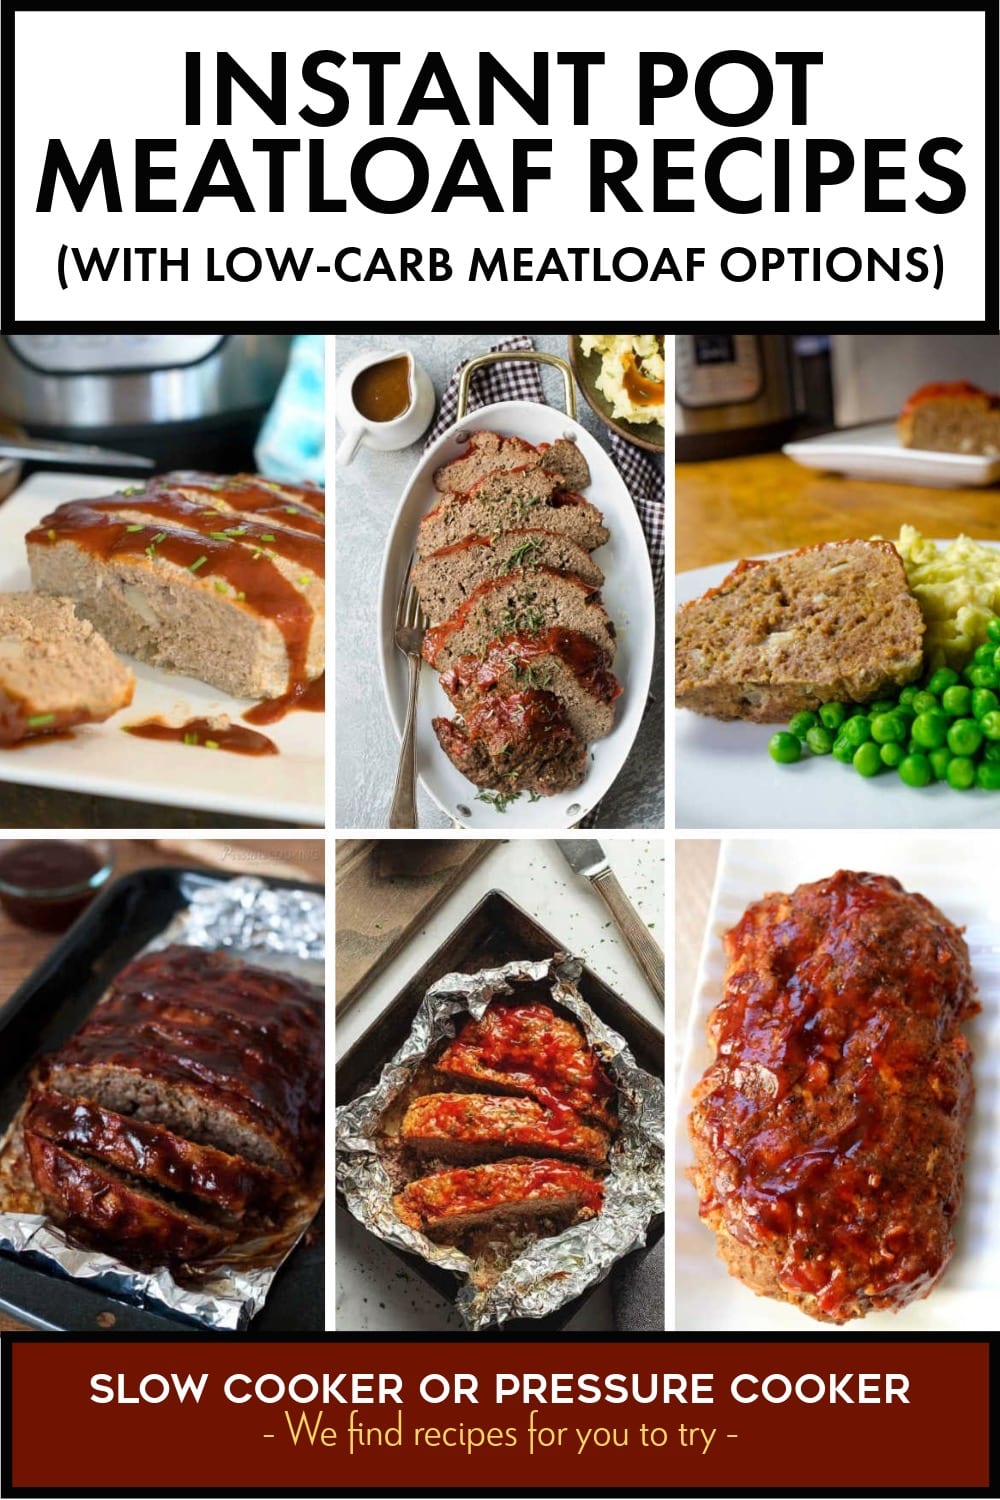 Pinterest image of Instant Pot Meatloaf Recipes (with low-carb meatloaf options)